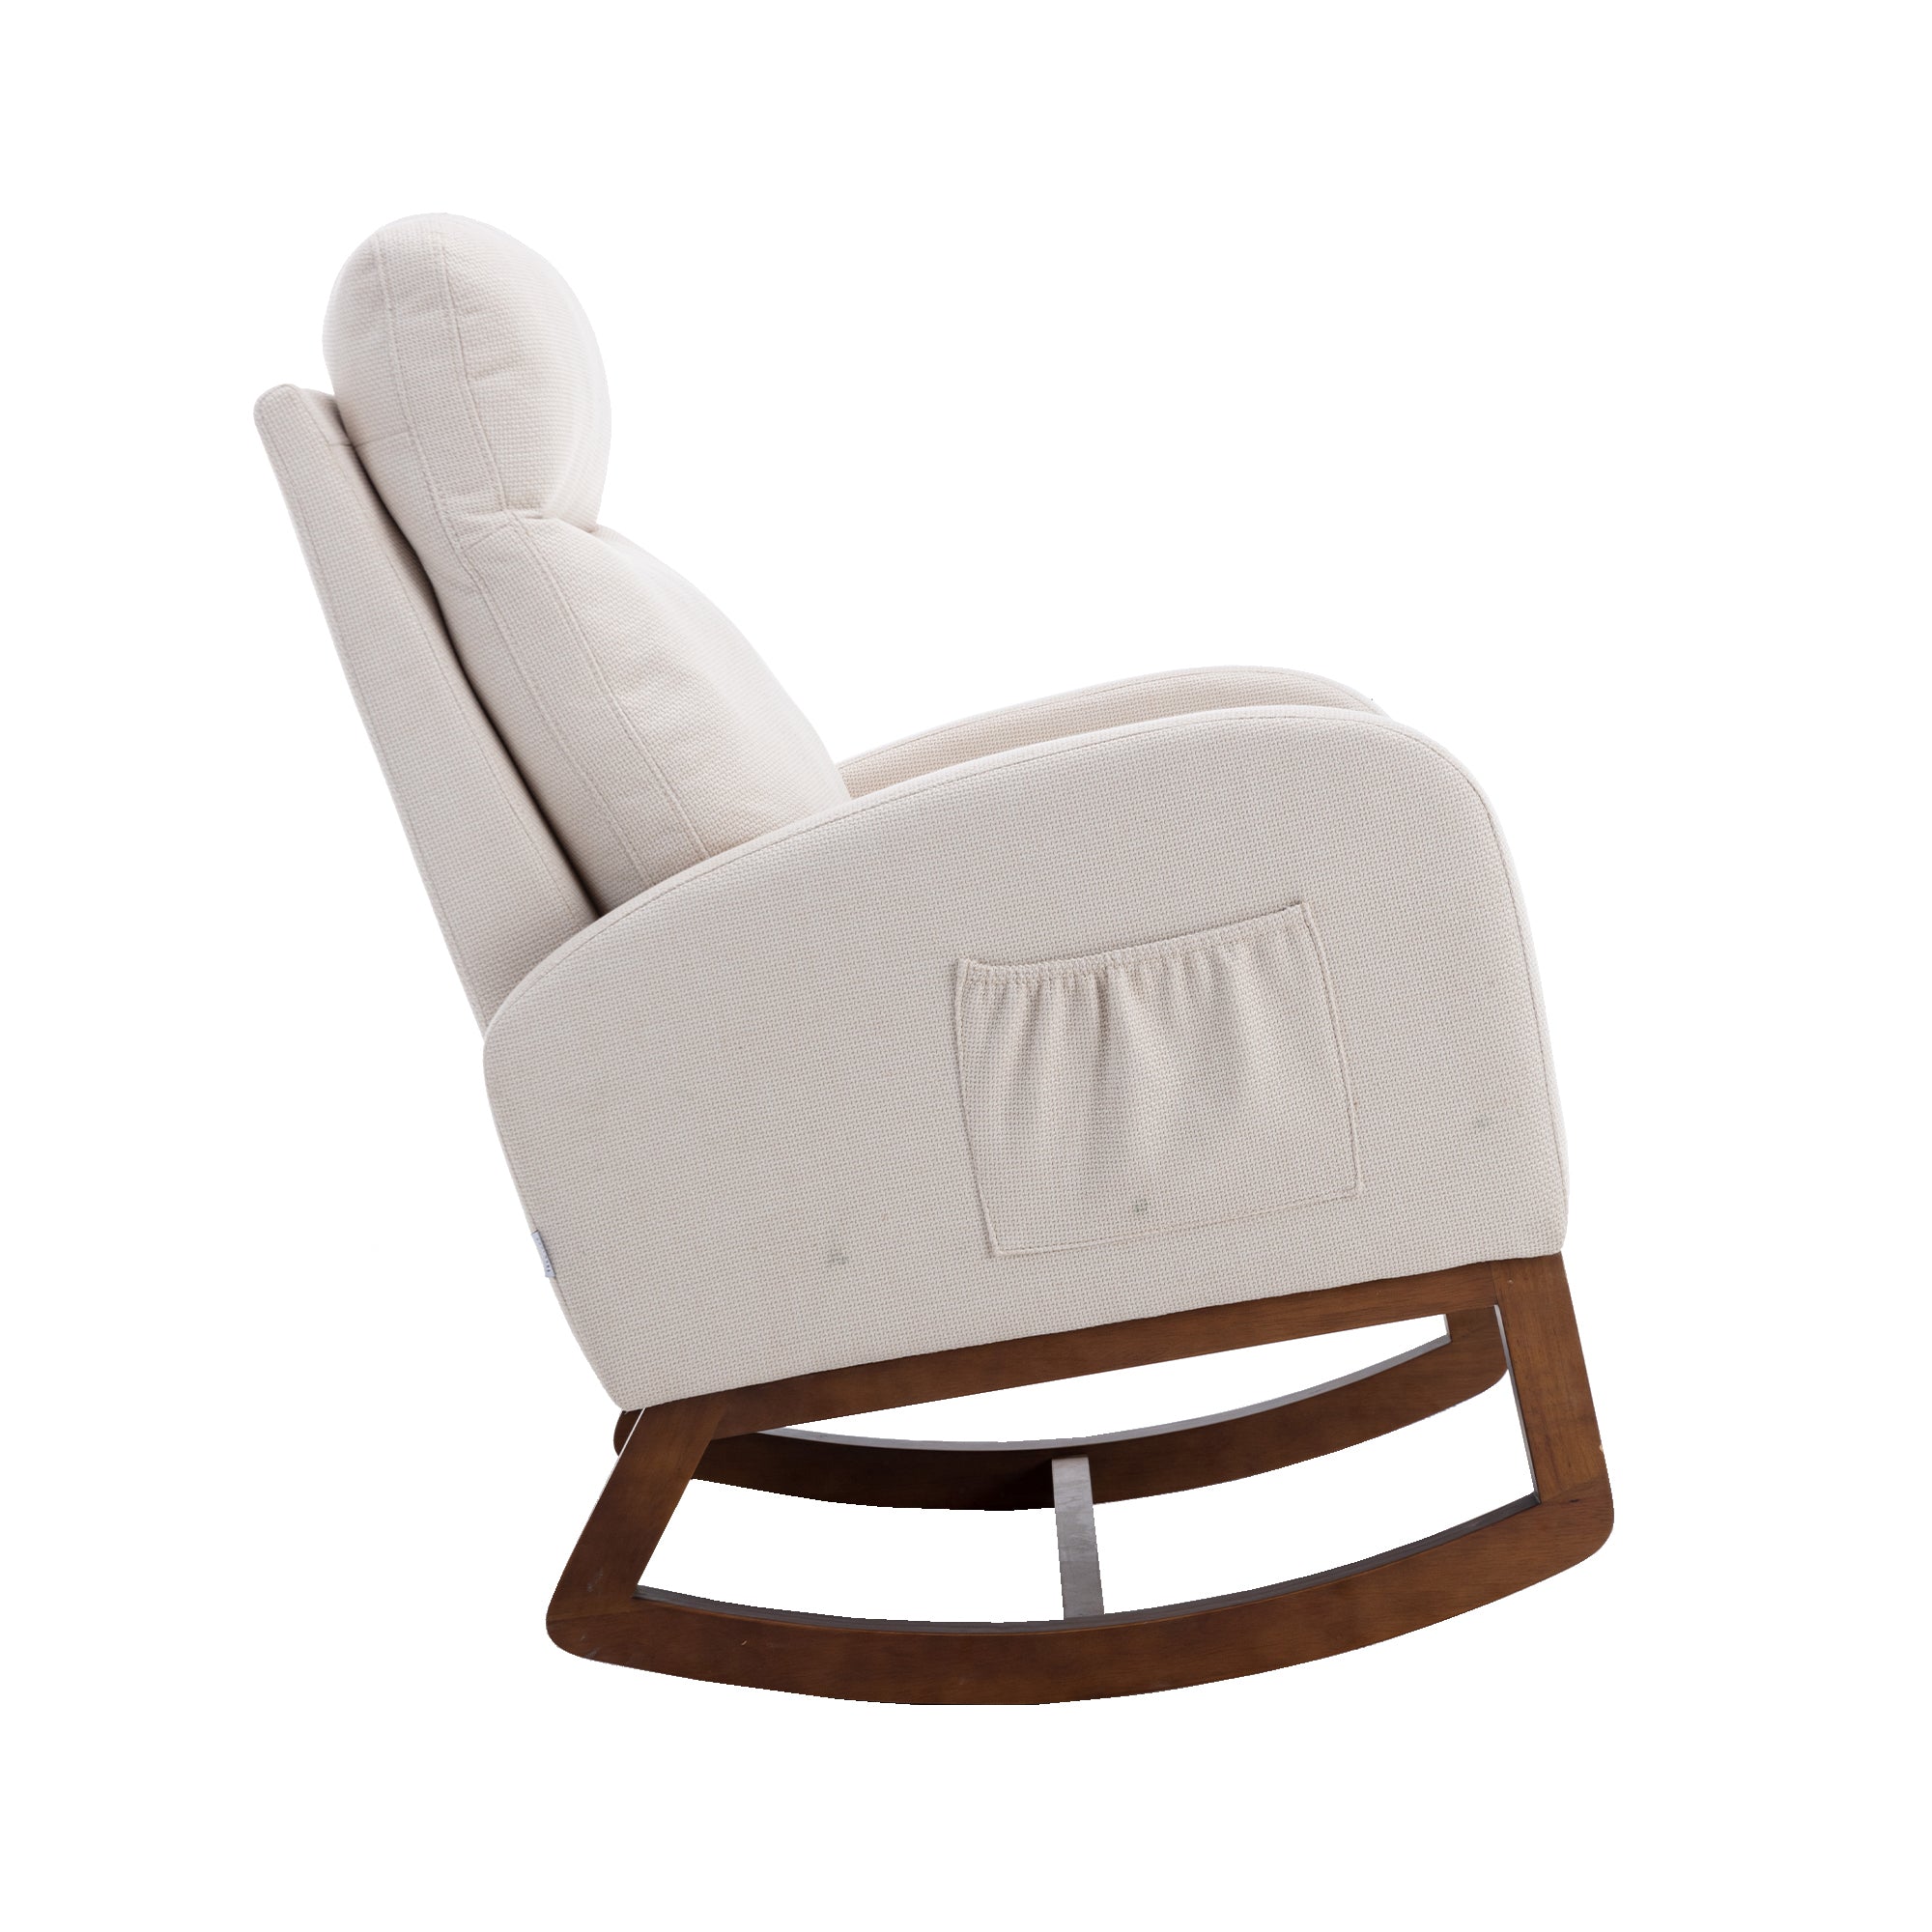 COOLMORE living room Comfortable rocking chair living beige-solid wood